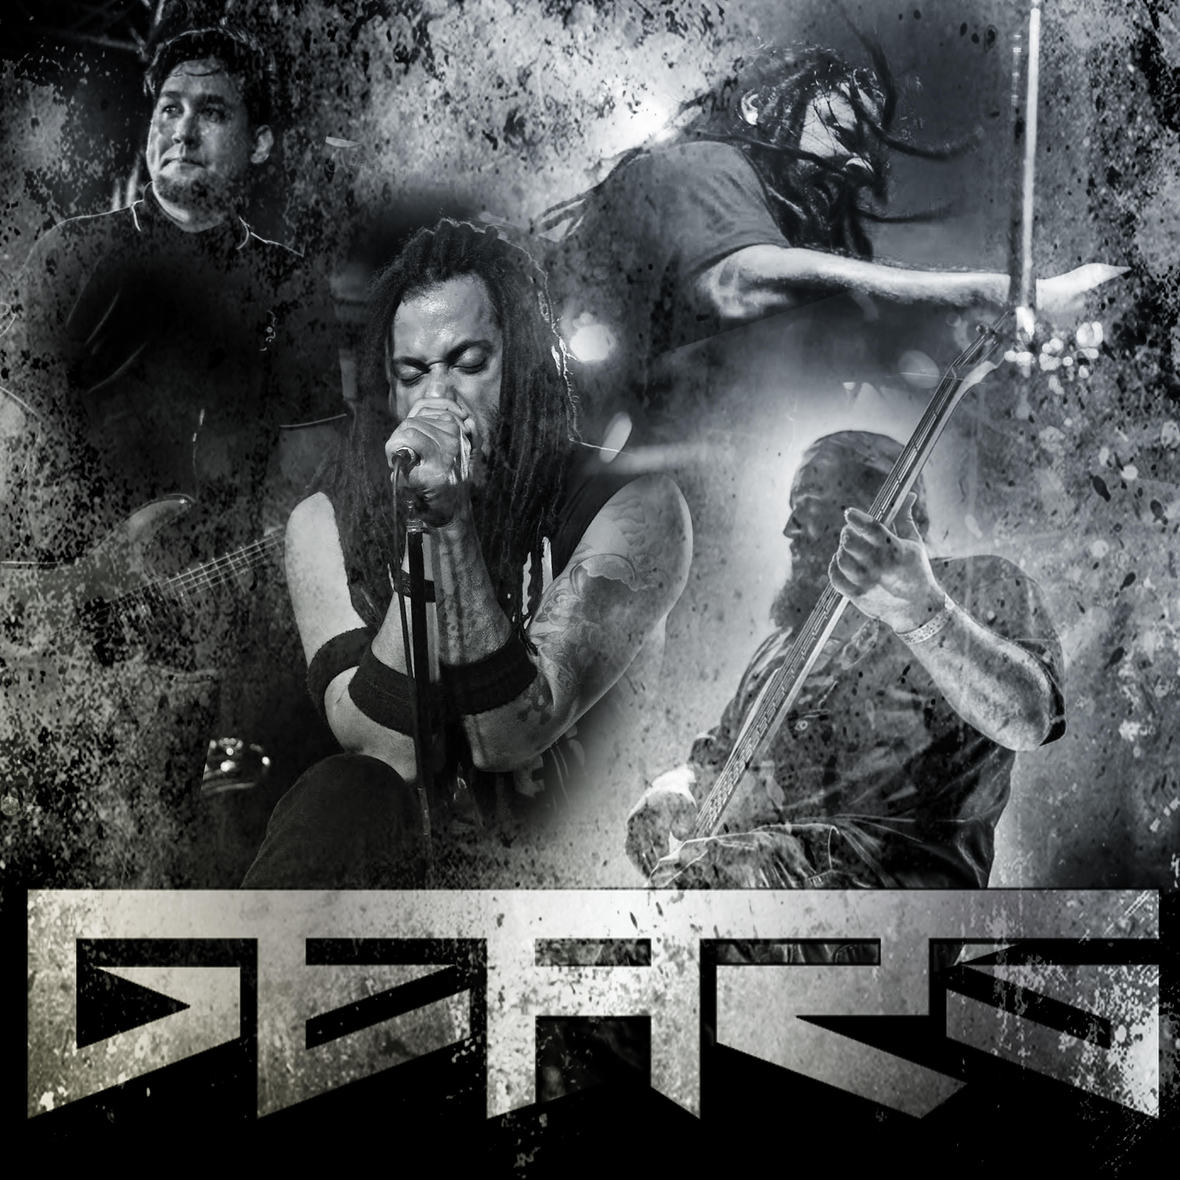 GEARS Releases Face Down Lyric Video From New EP "Pride Comes Before The Fall" (Available Now)